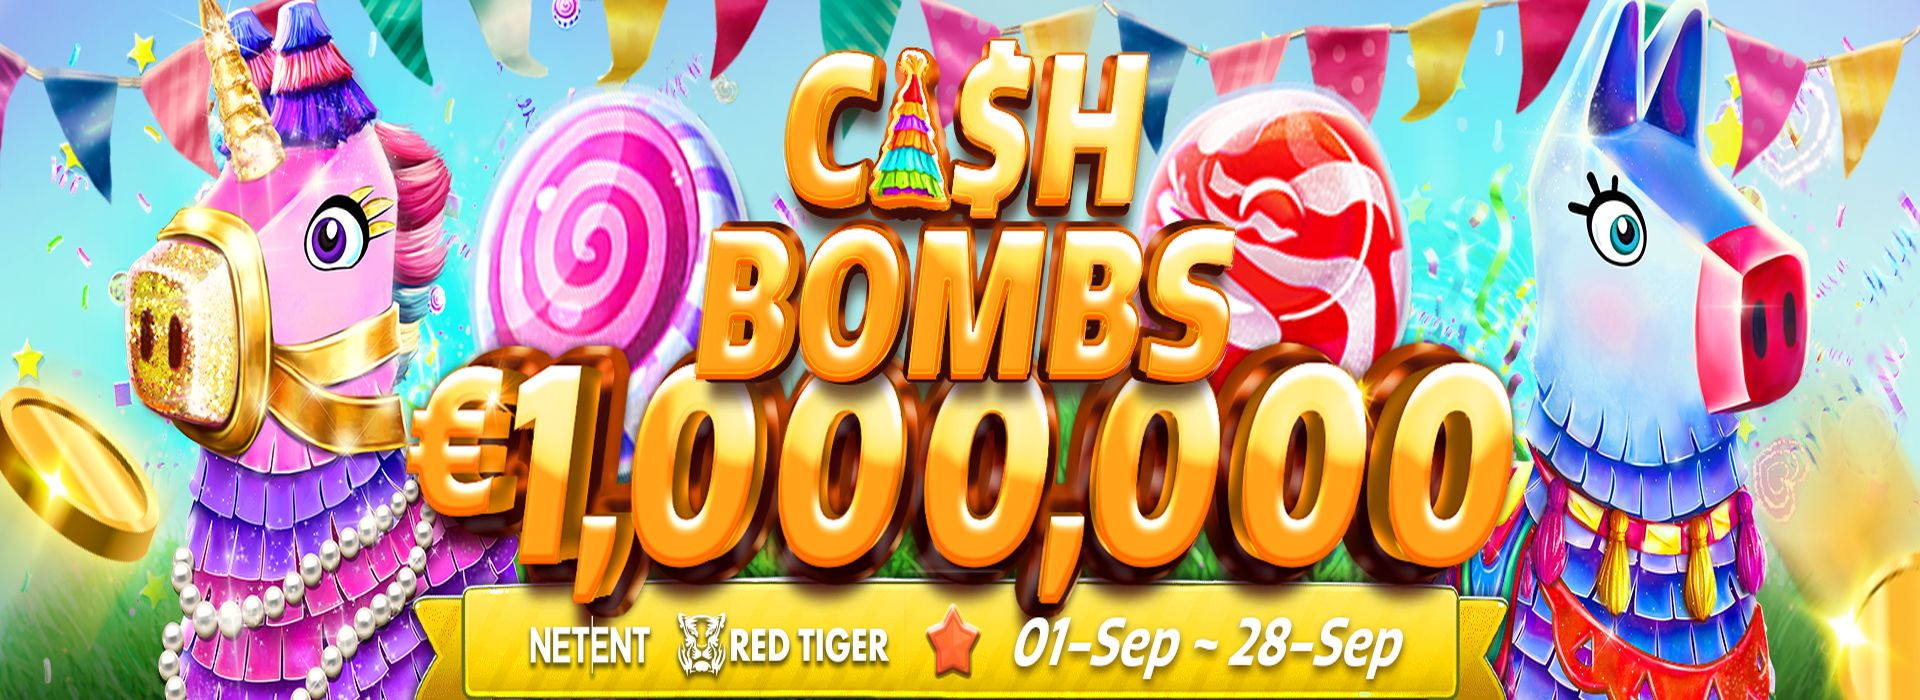 NETENT and FlowGaming’s - Cash Bombs Network Promotion